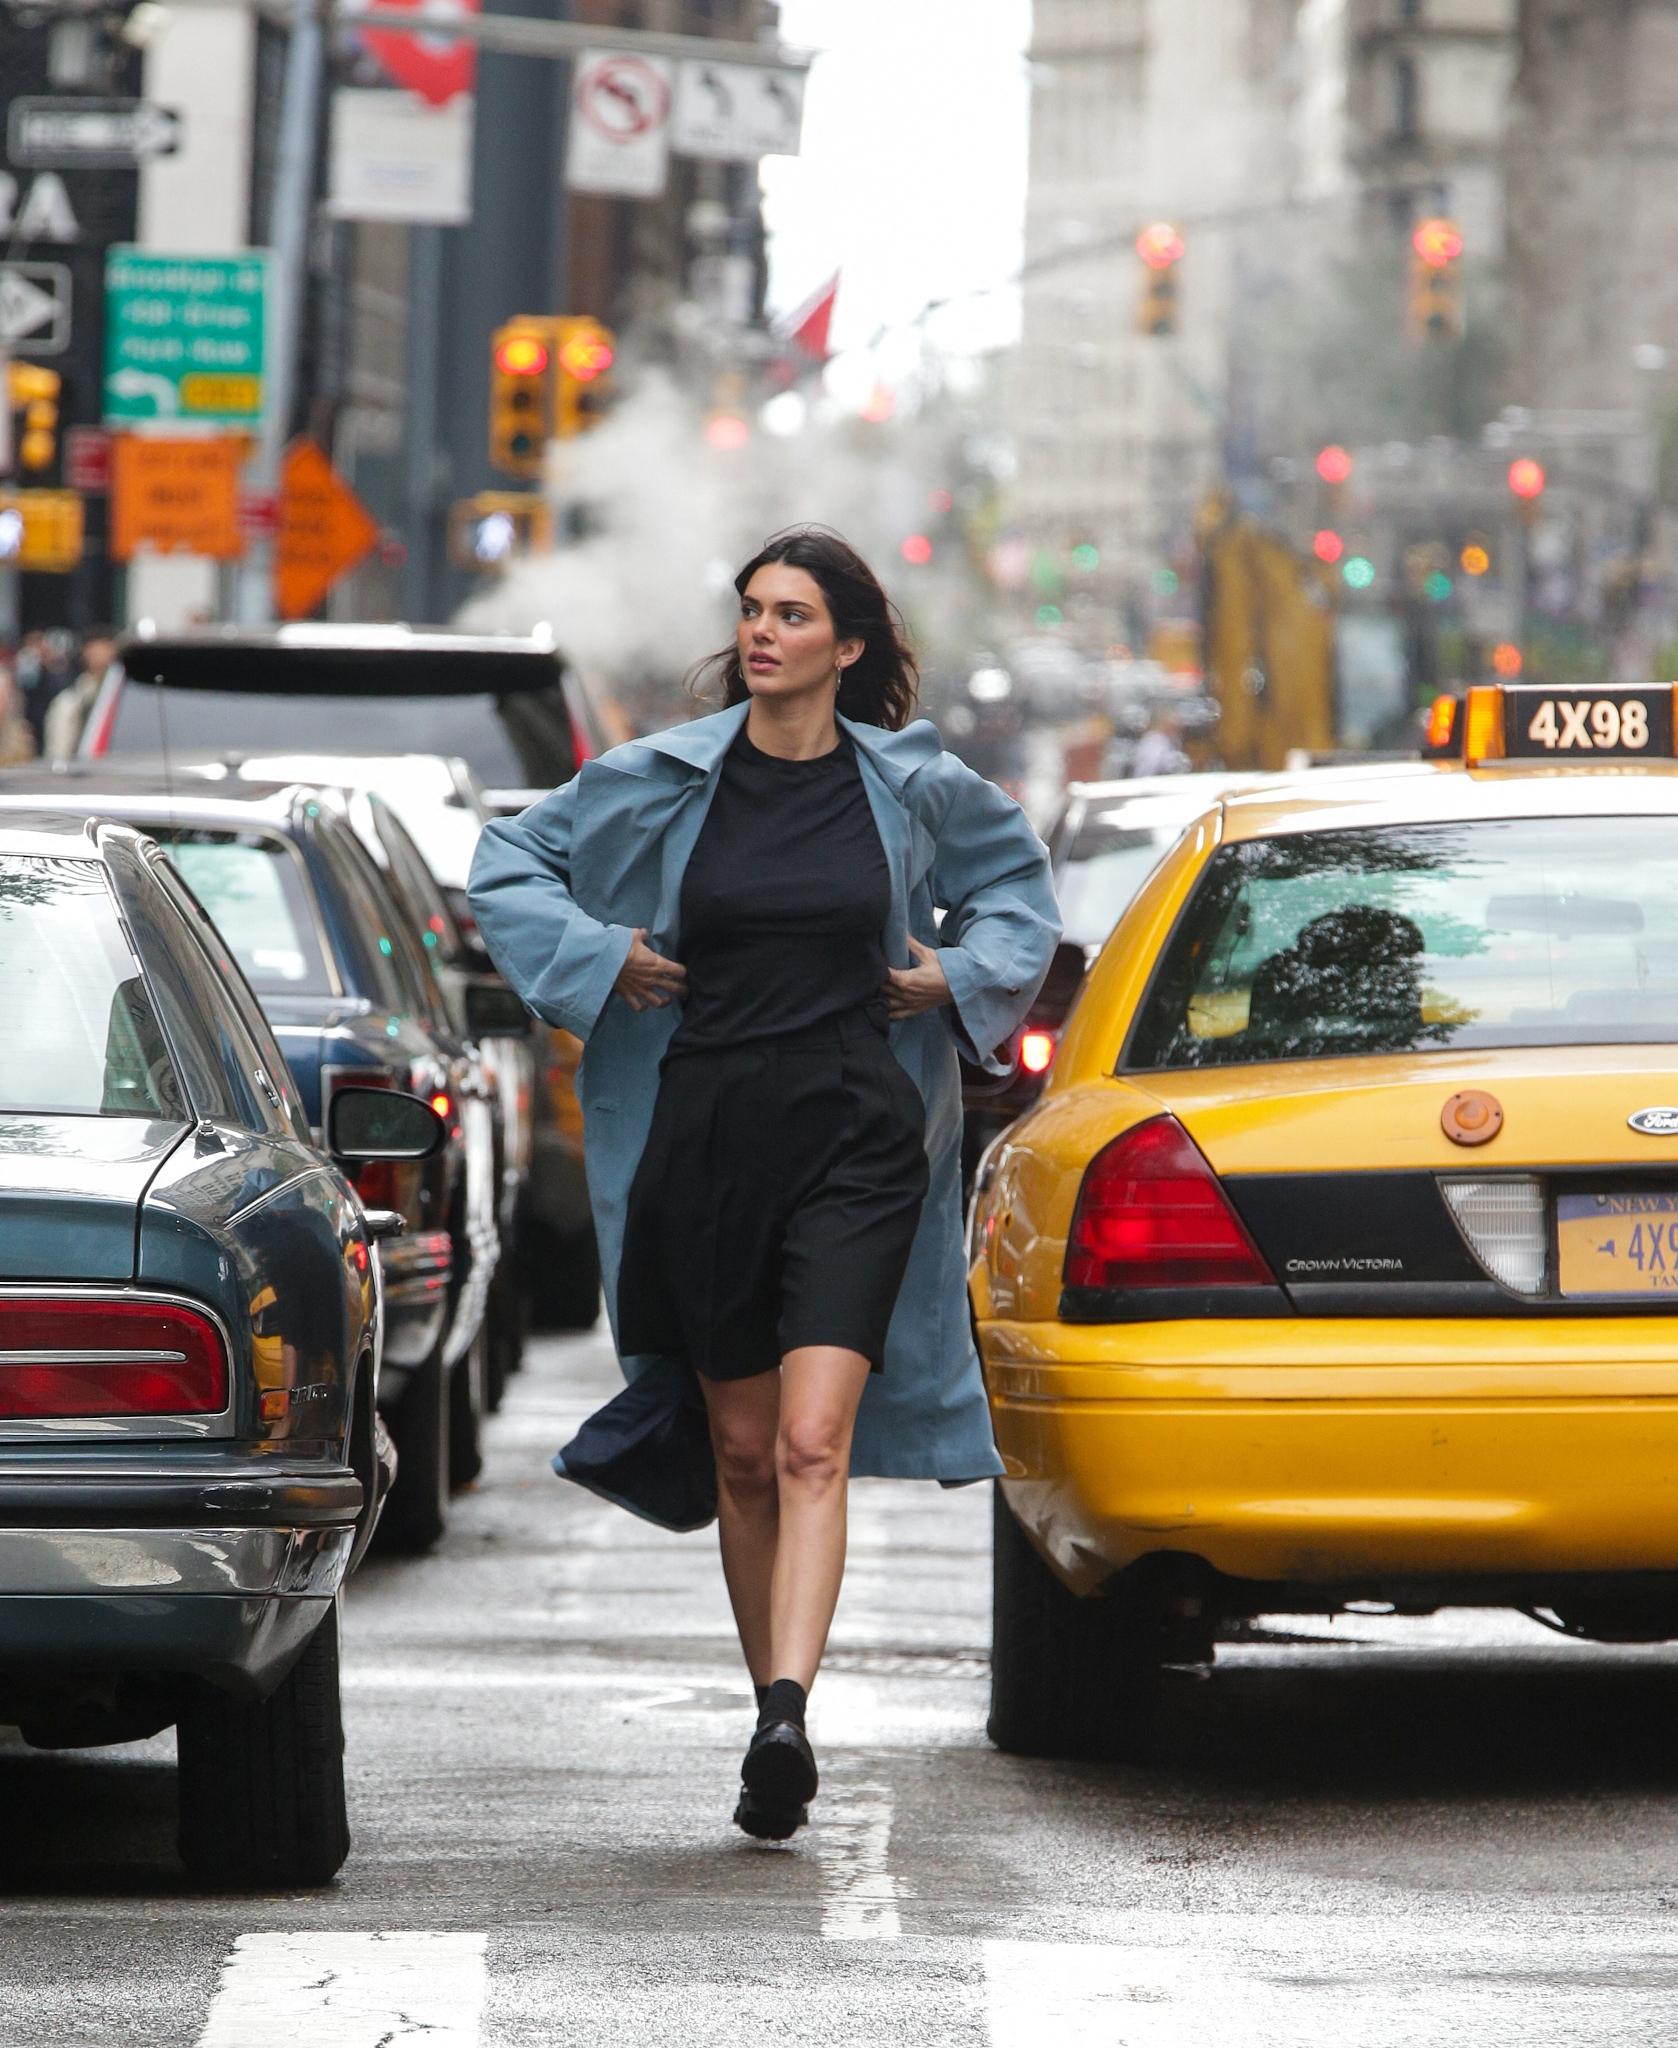 Kendall Jenner seen walking down the street filming a commercial this afternoon in New York City